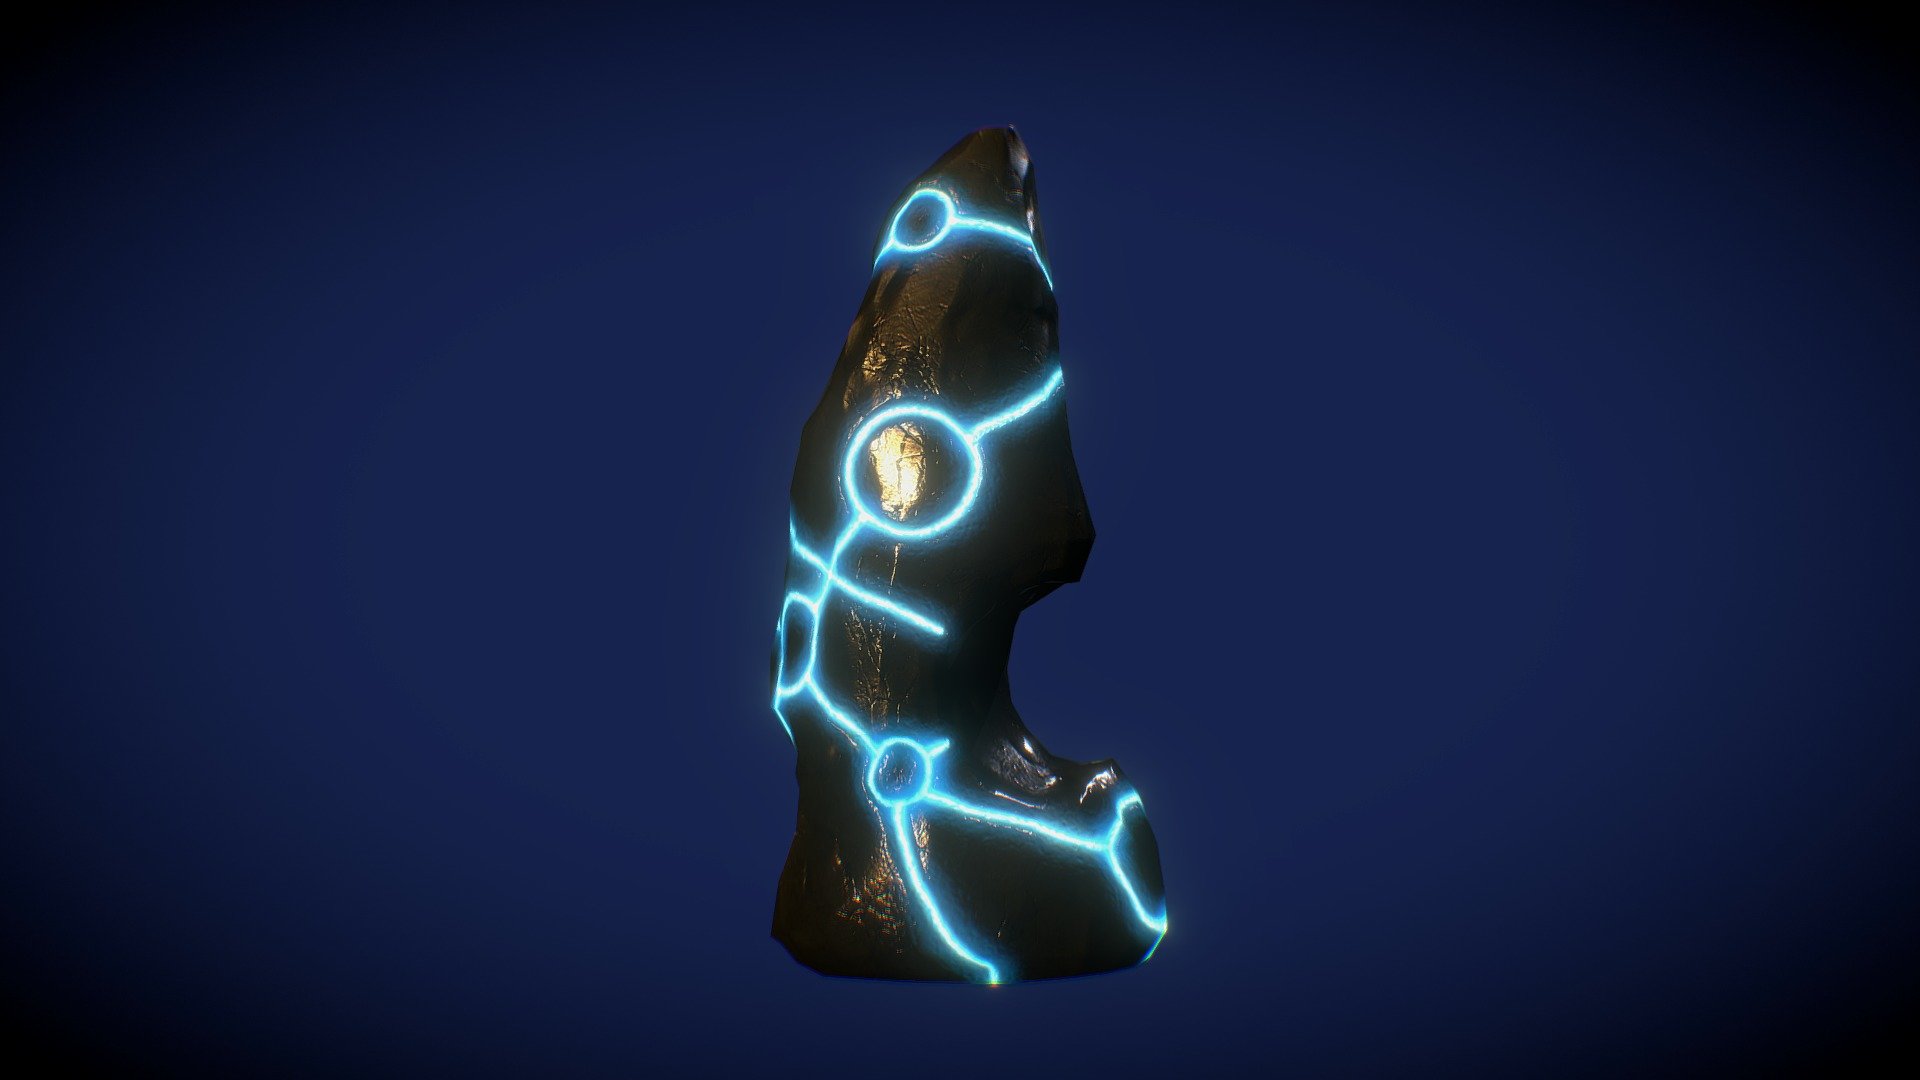 A lighted obelisk made of Obsidian, or volcanic glass. Intended to help players find their way through the first level of Wayward. Maya, Zbrush, 3D-Coat, Substance Painter, Photoshop. Thanks guys, hope you enjoy it 3d model